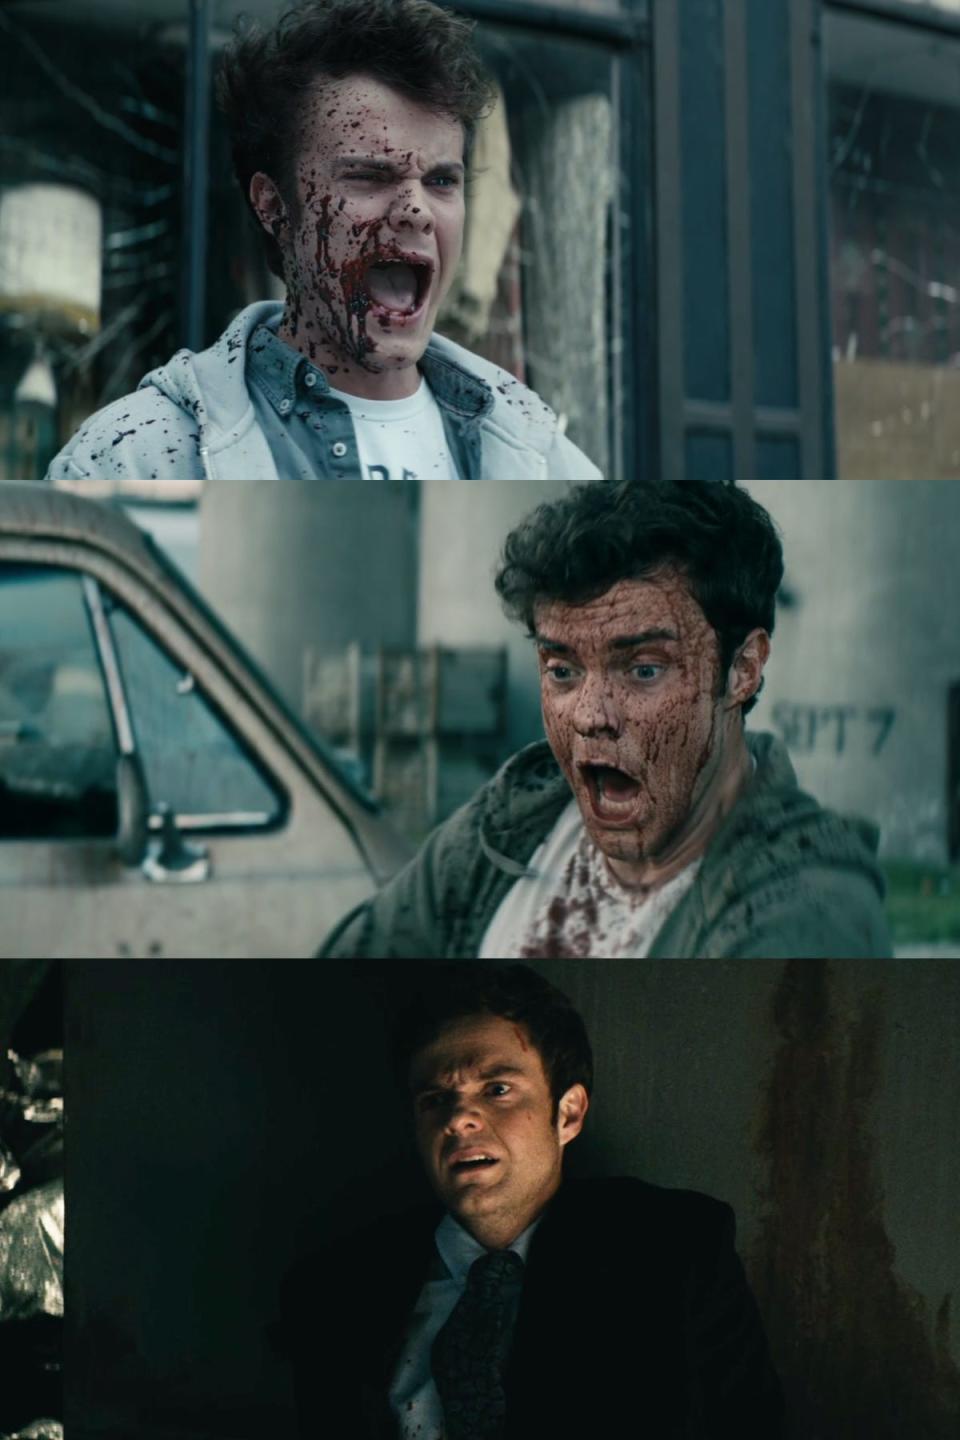 Hughie covered in blood in seasons one, two, and three of "The Boys."